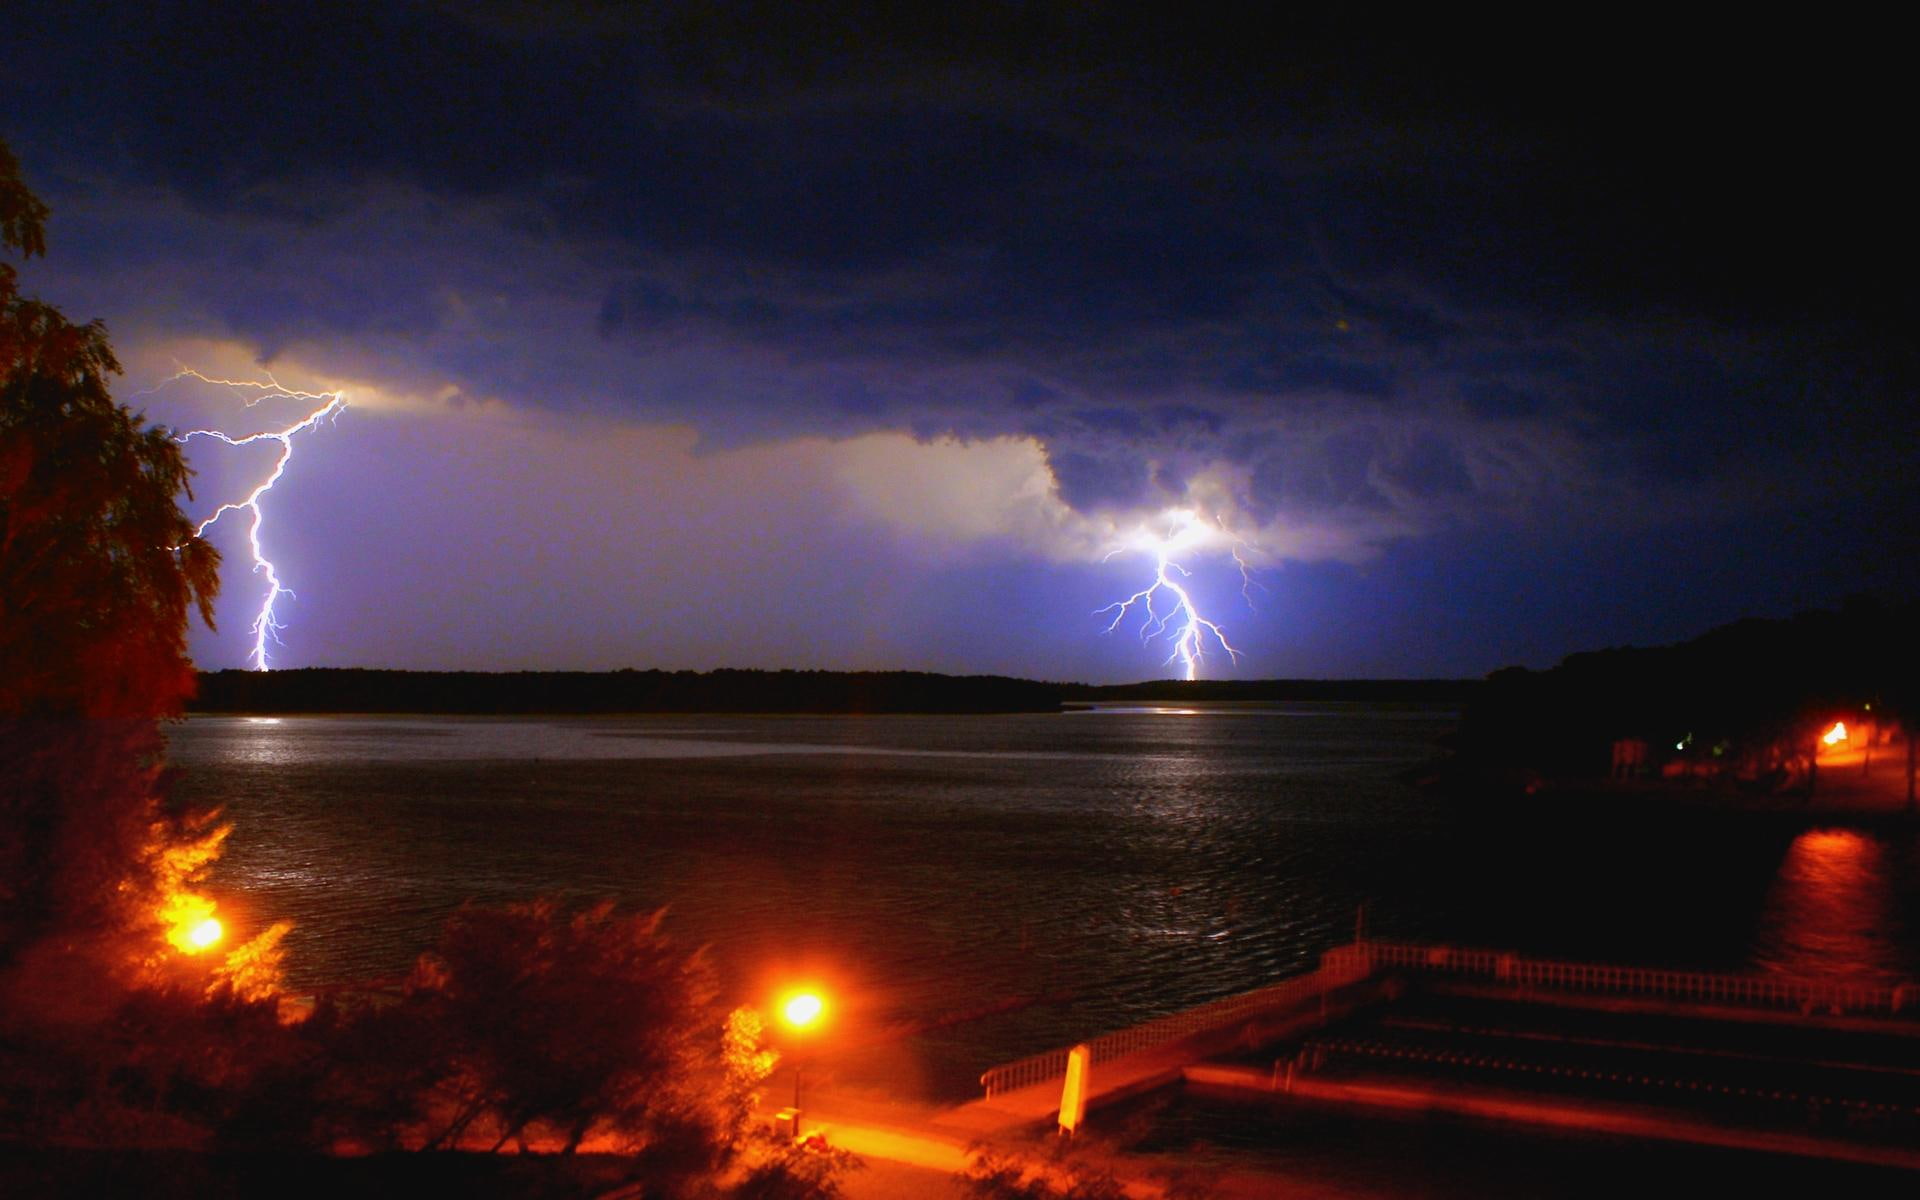 Double Lightning Bolts, lights, river, night, nature and landscapes